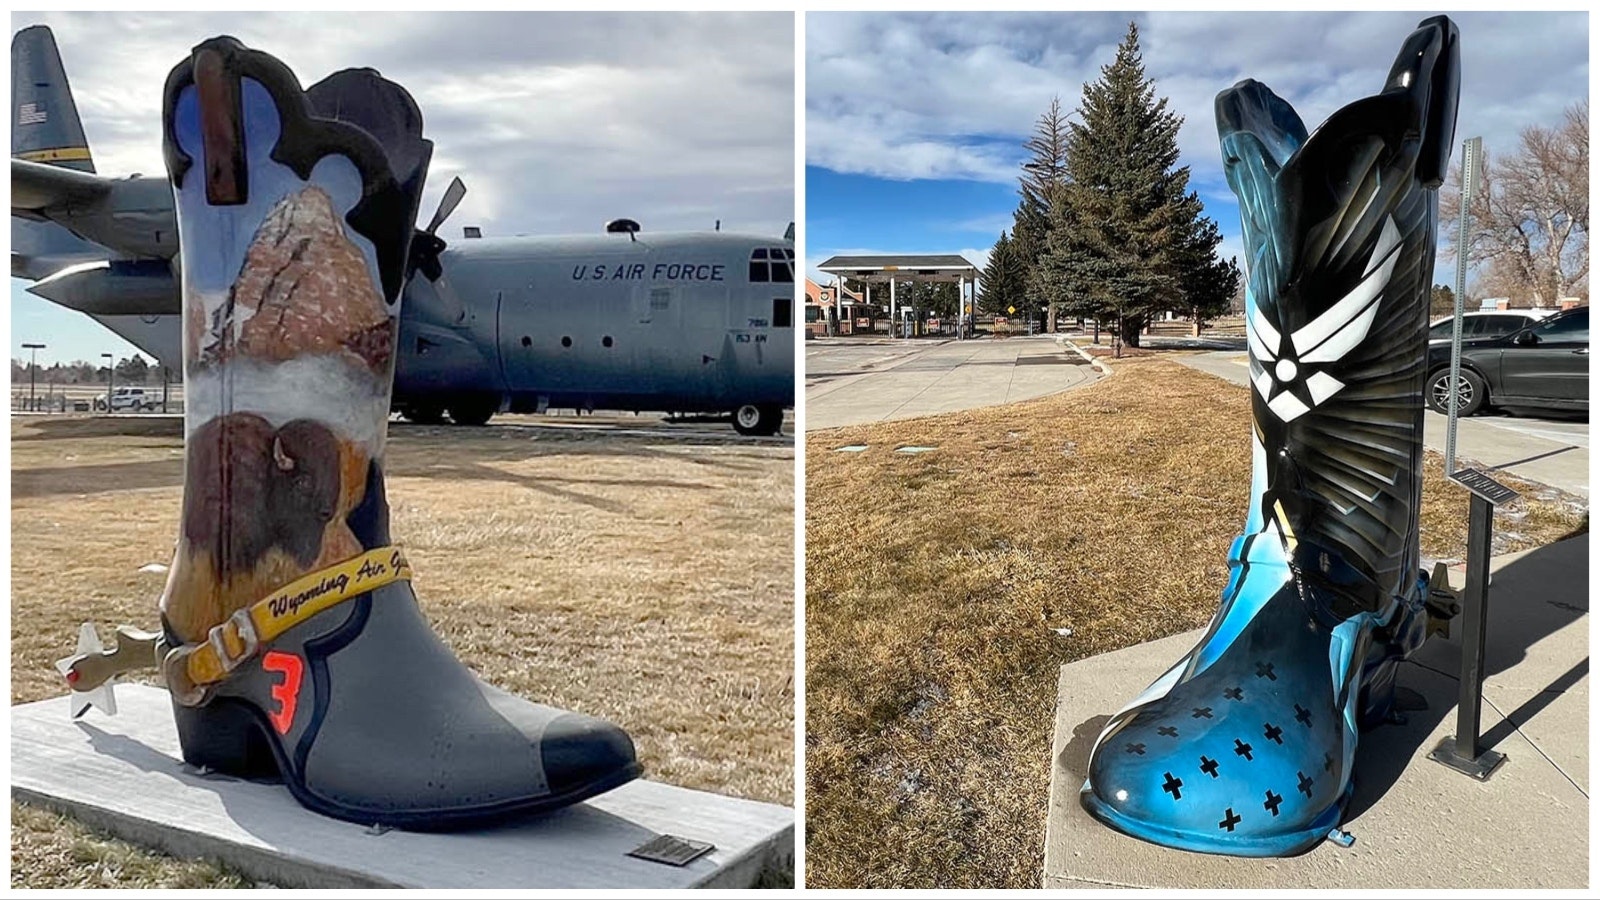 A pair of new Big Boots in Cheyenne's collection honor the city's military legacy: Wyoming National Guard, left, and the U.S. Air Force, right.